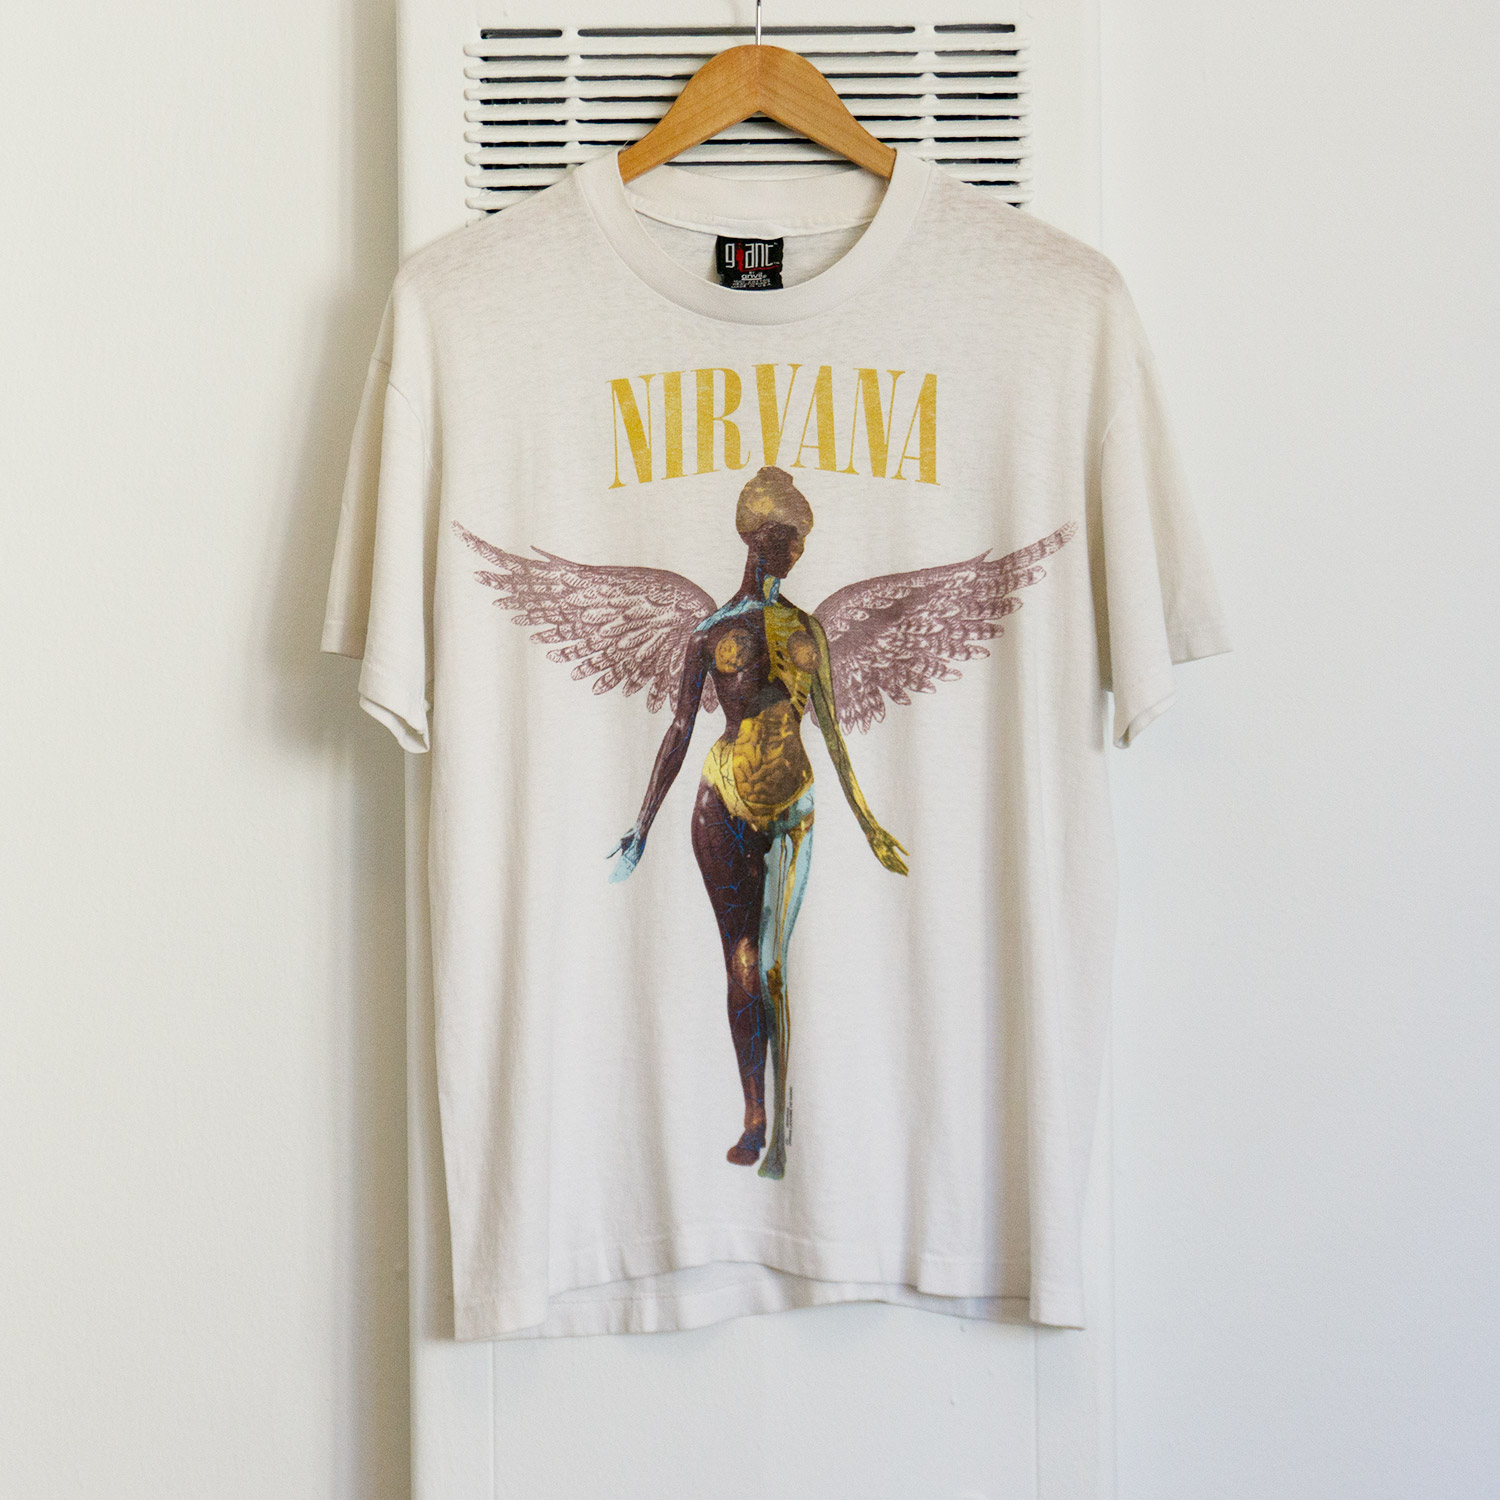 Vintage Nirvana In Utero T-shirt with Giant by Anvil Neck Tag, Front